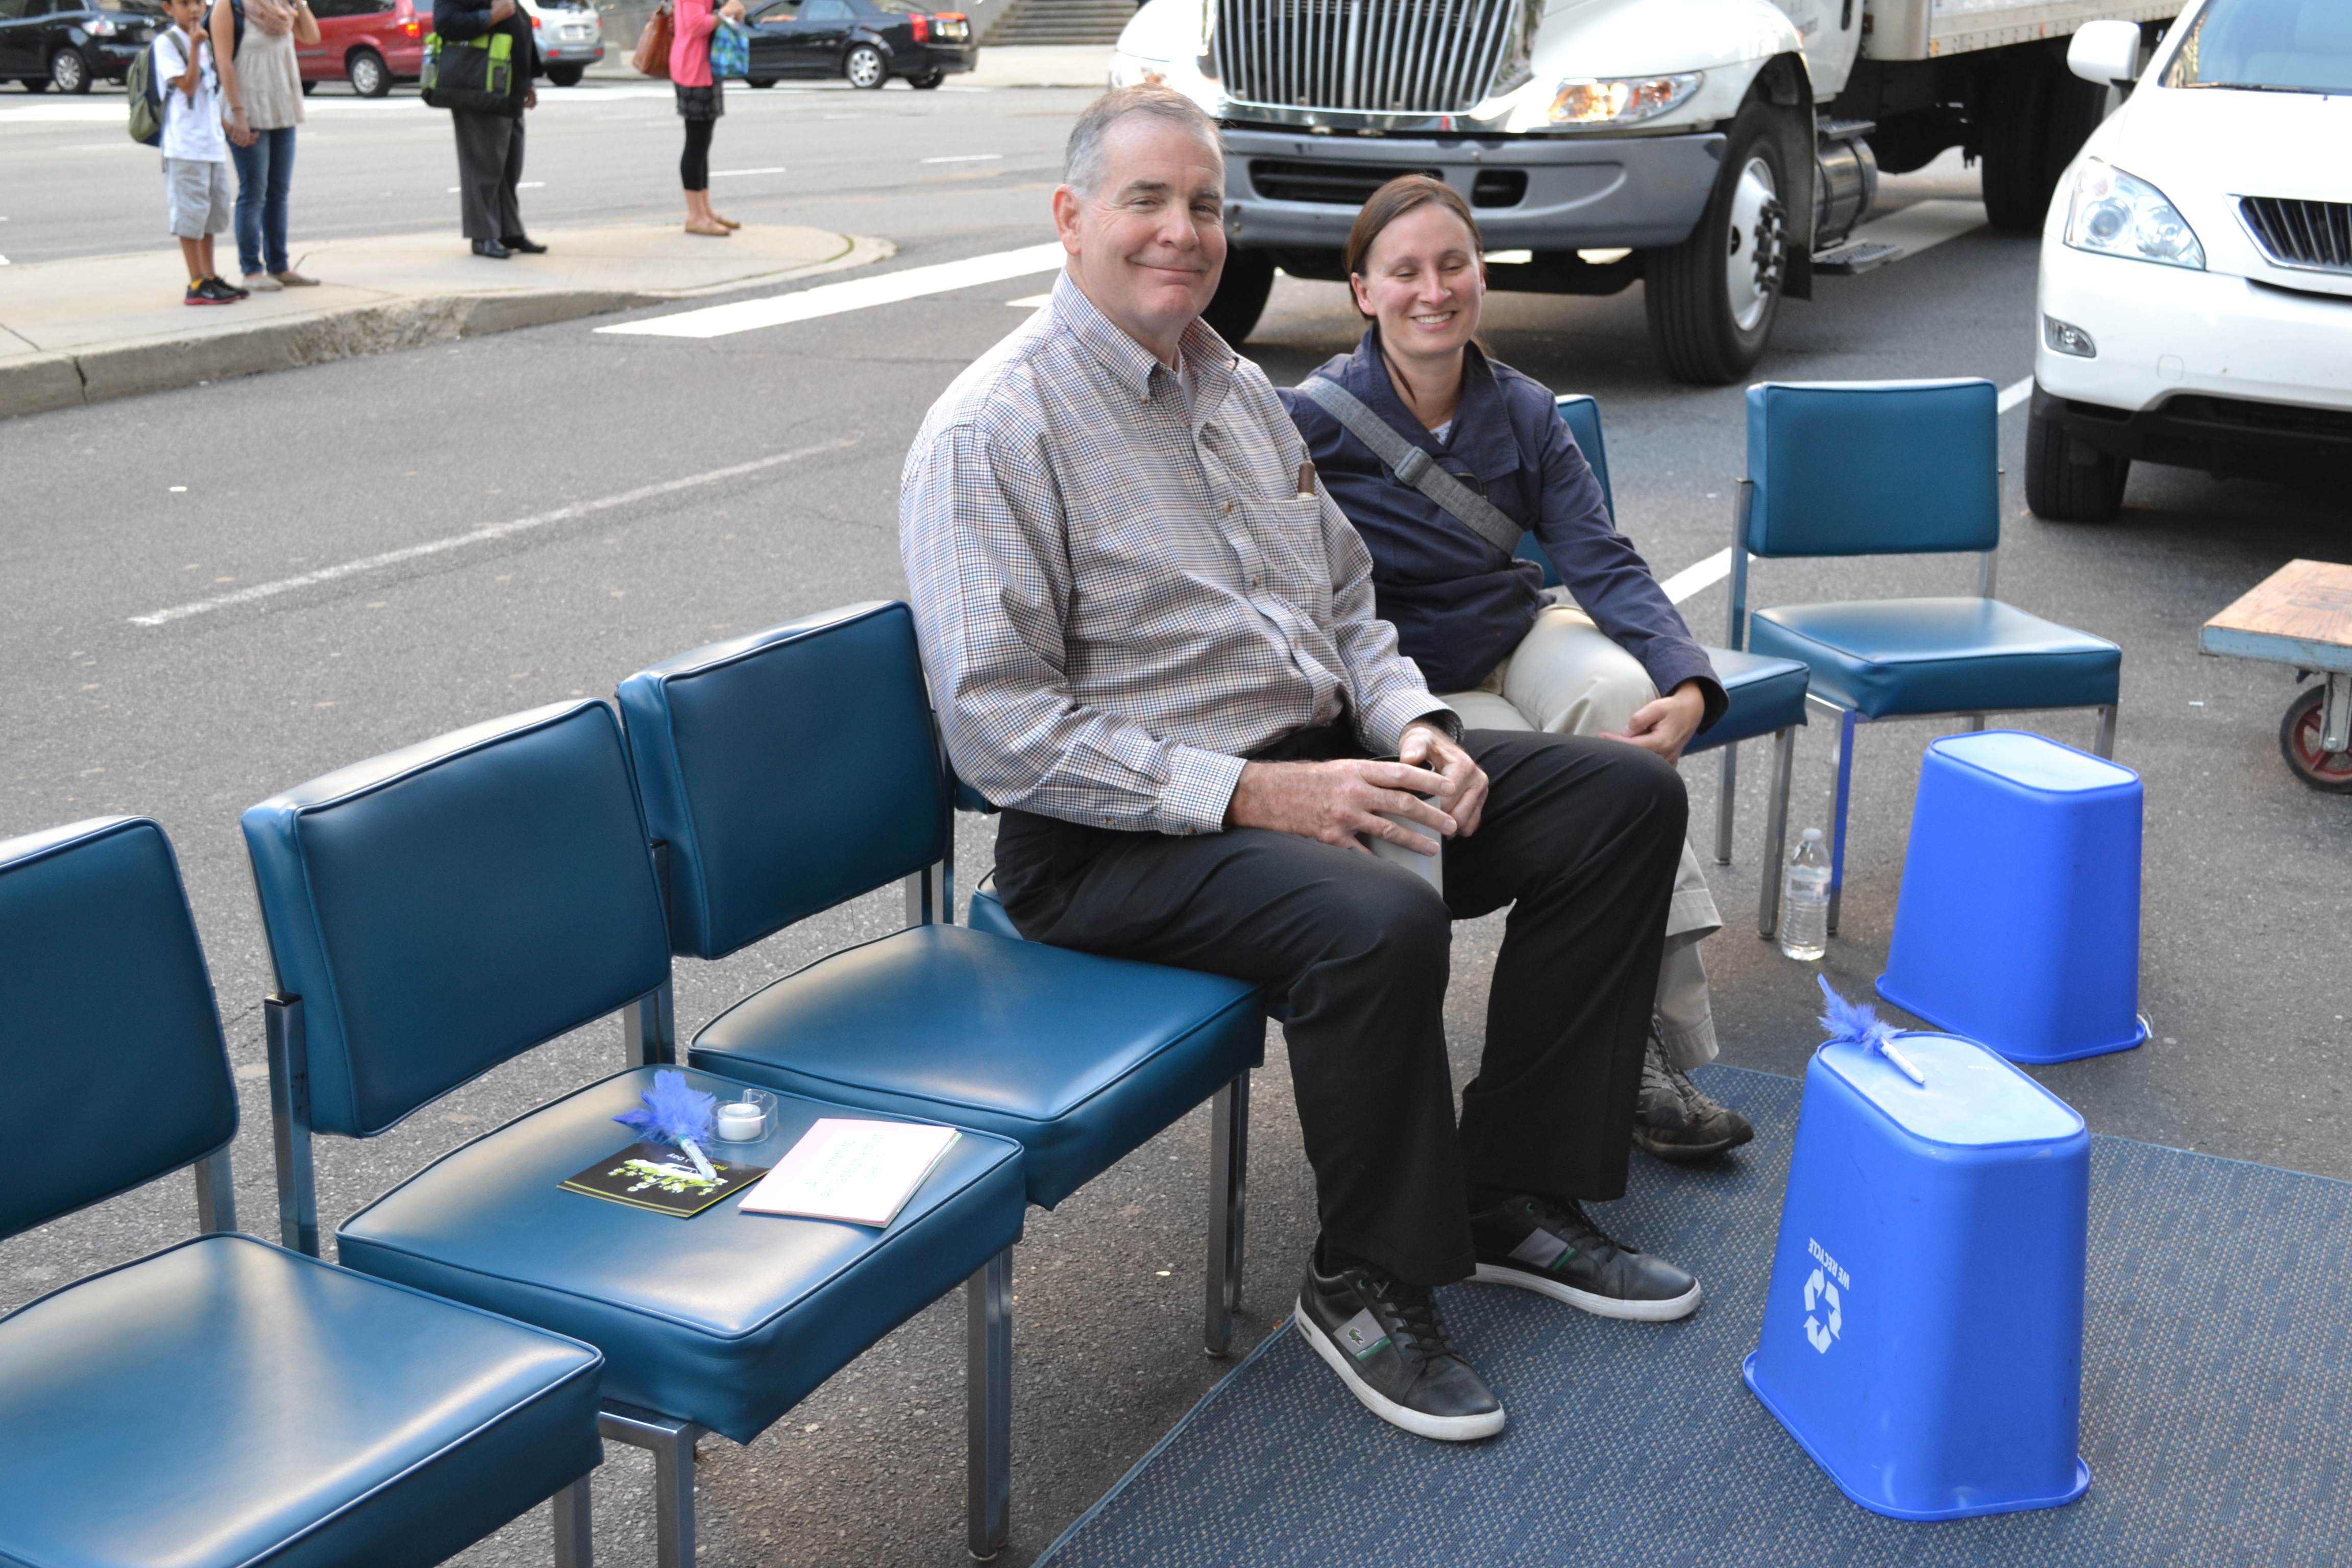 Park(ing) Day: Mayor's Office of Transportation and Utilities